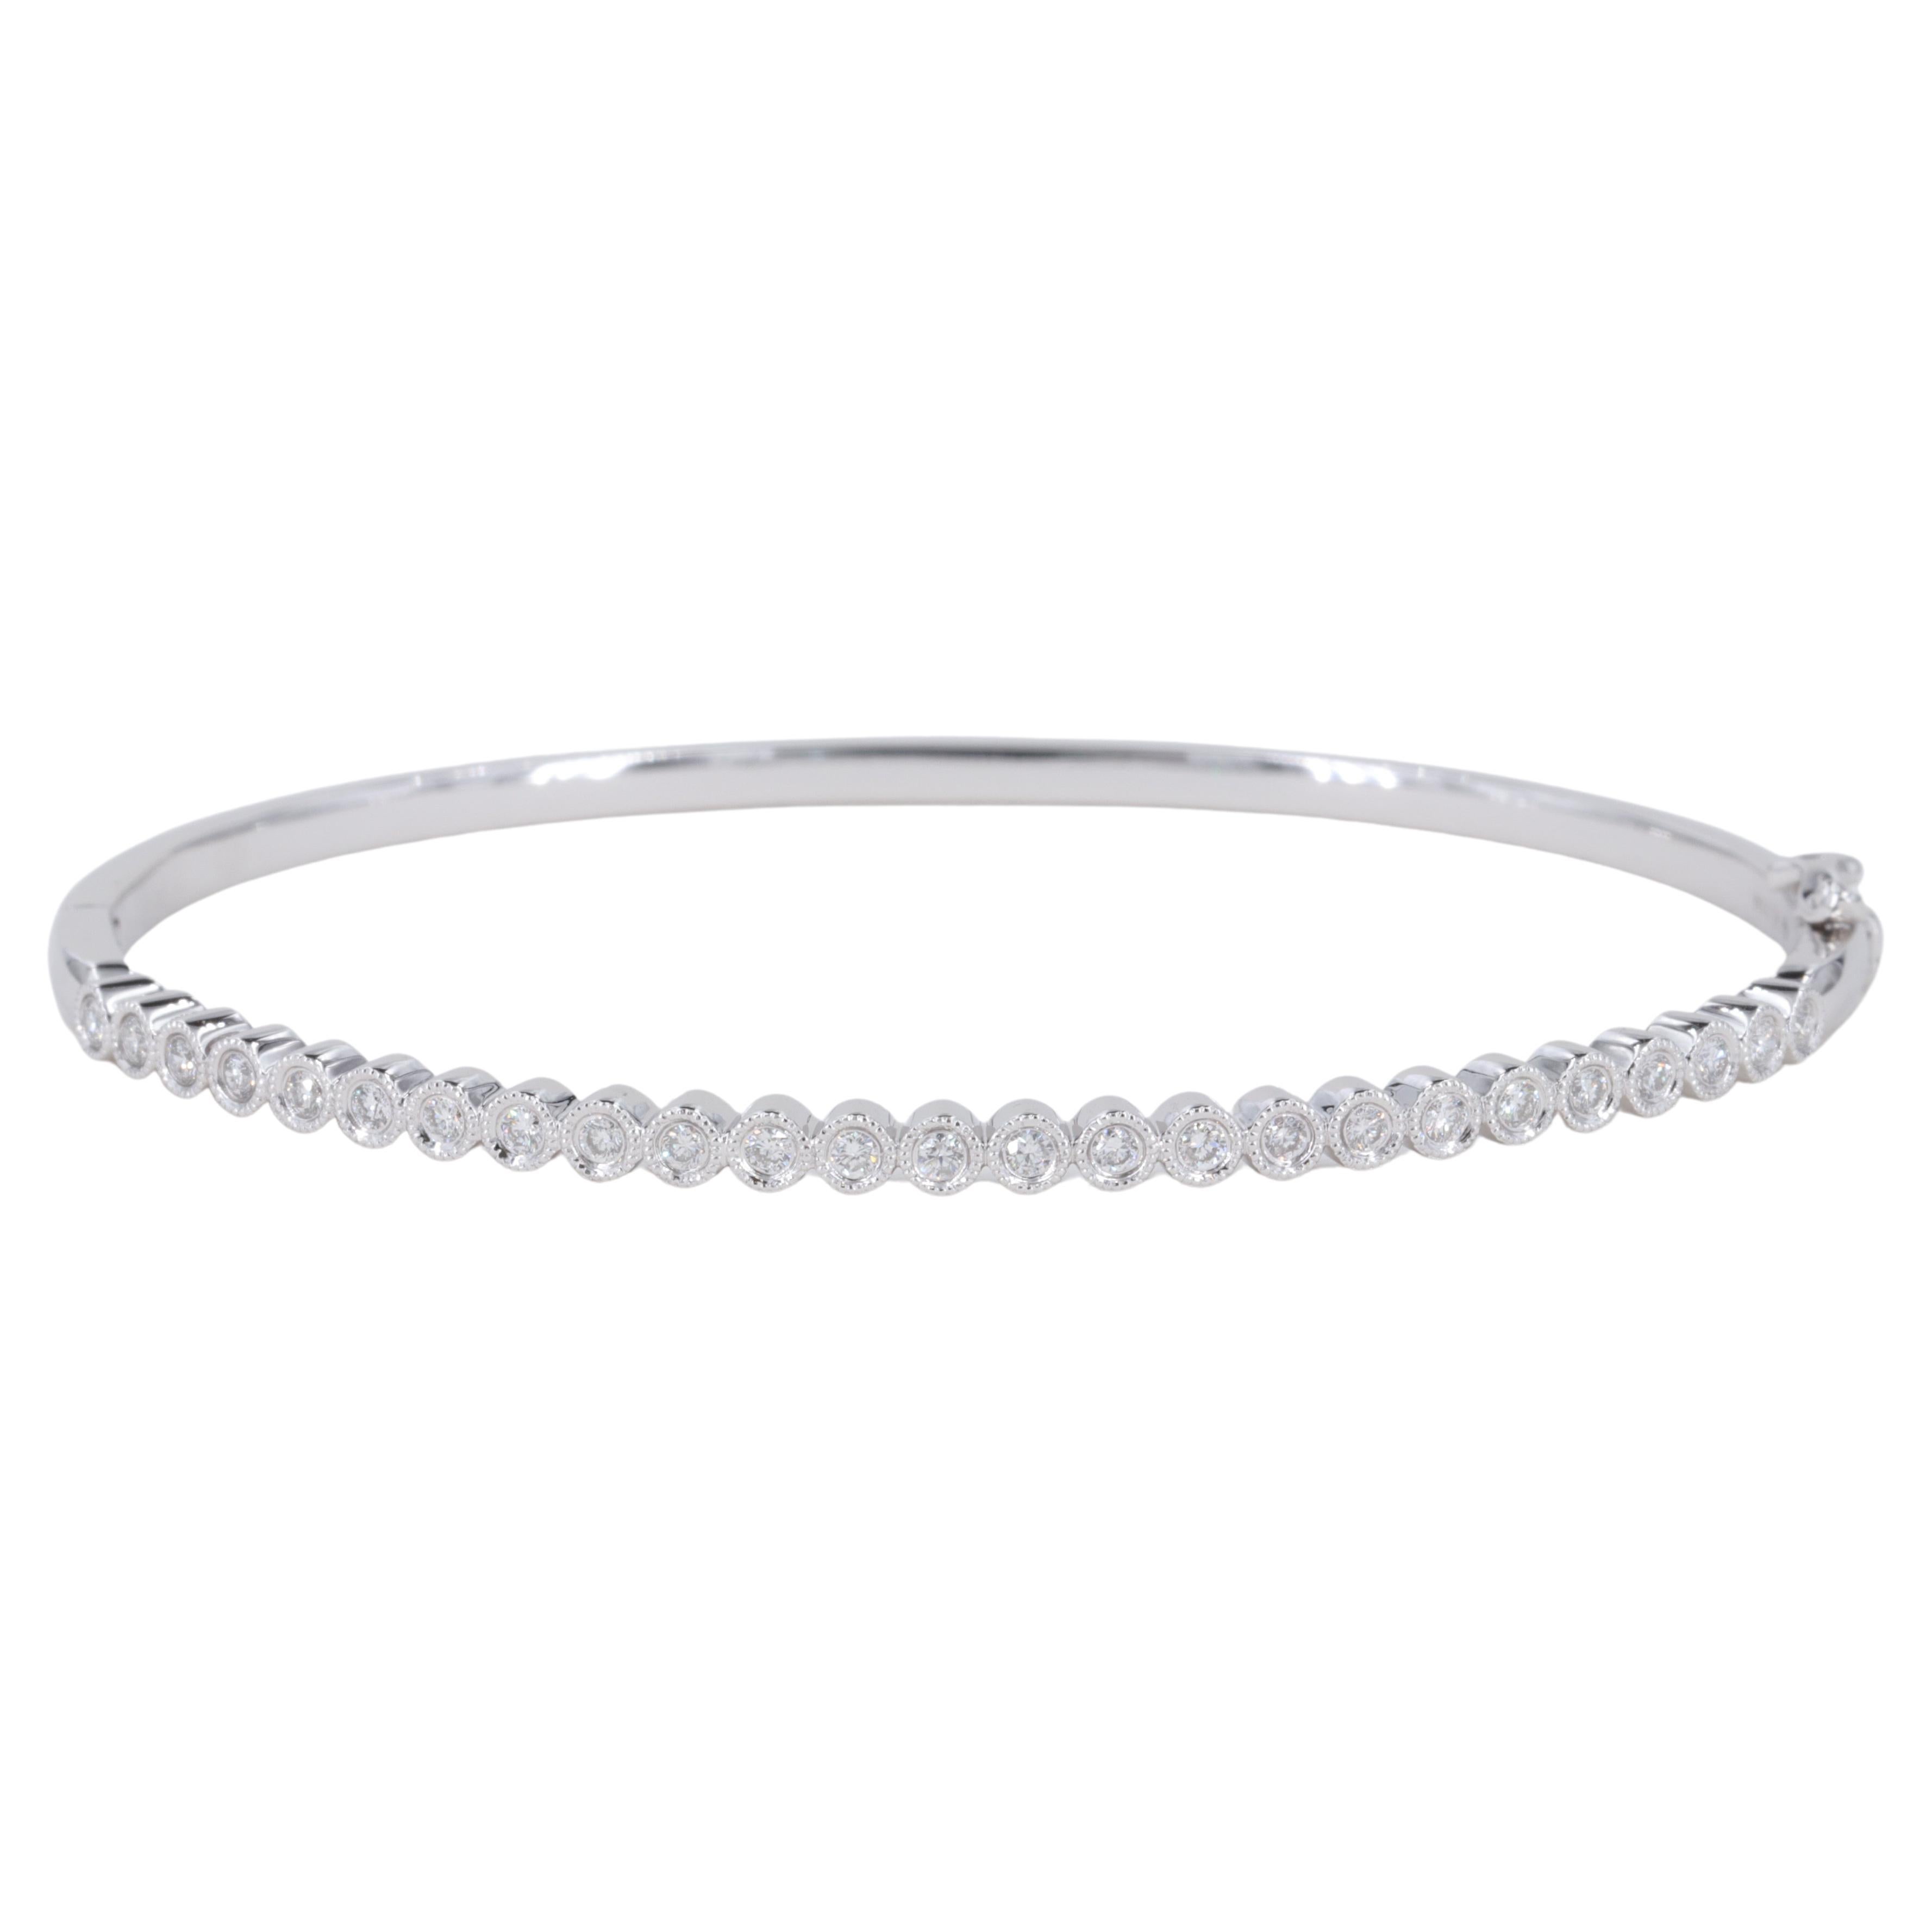 Diamond and White Gold Stackable Hinged Bangle Bracelet